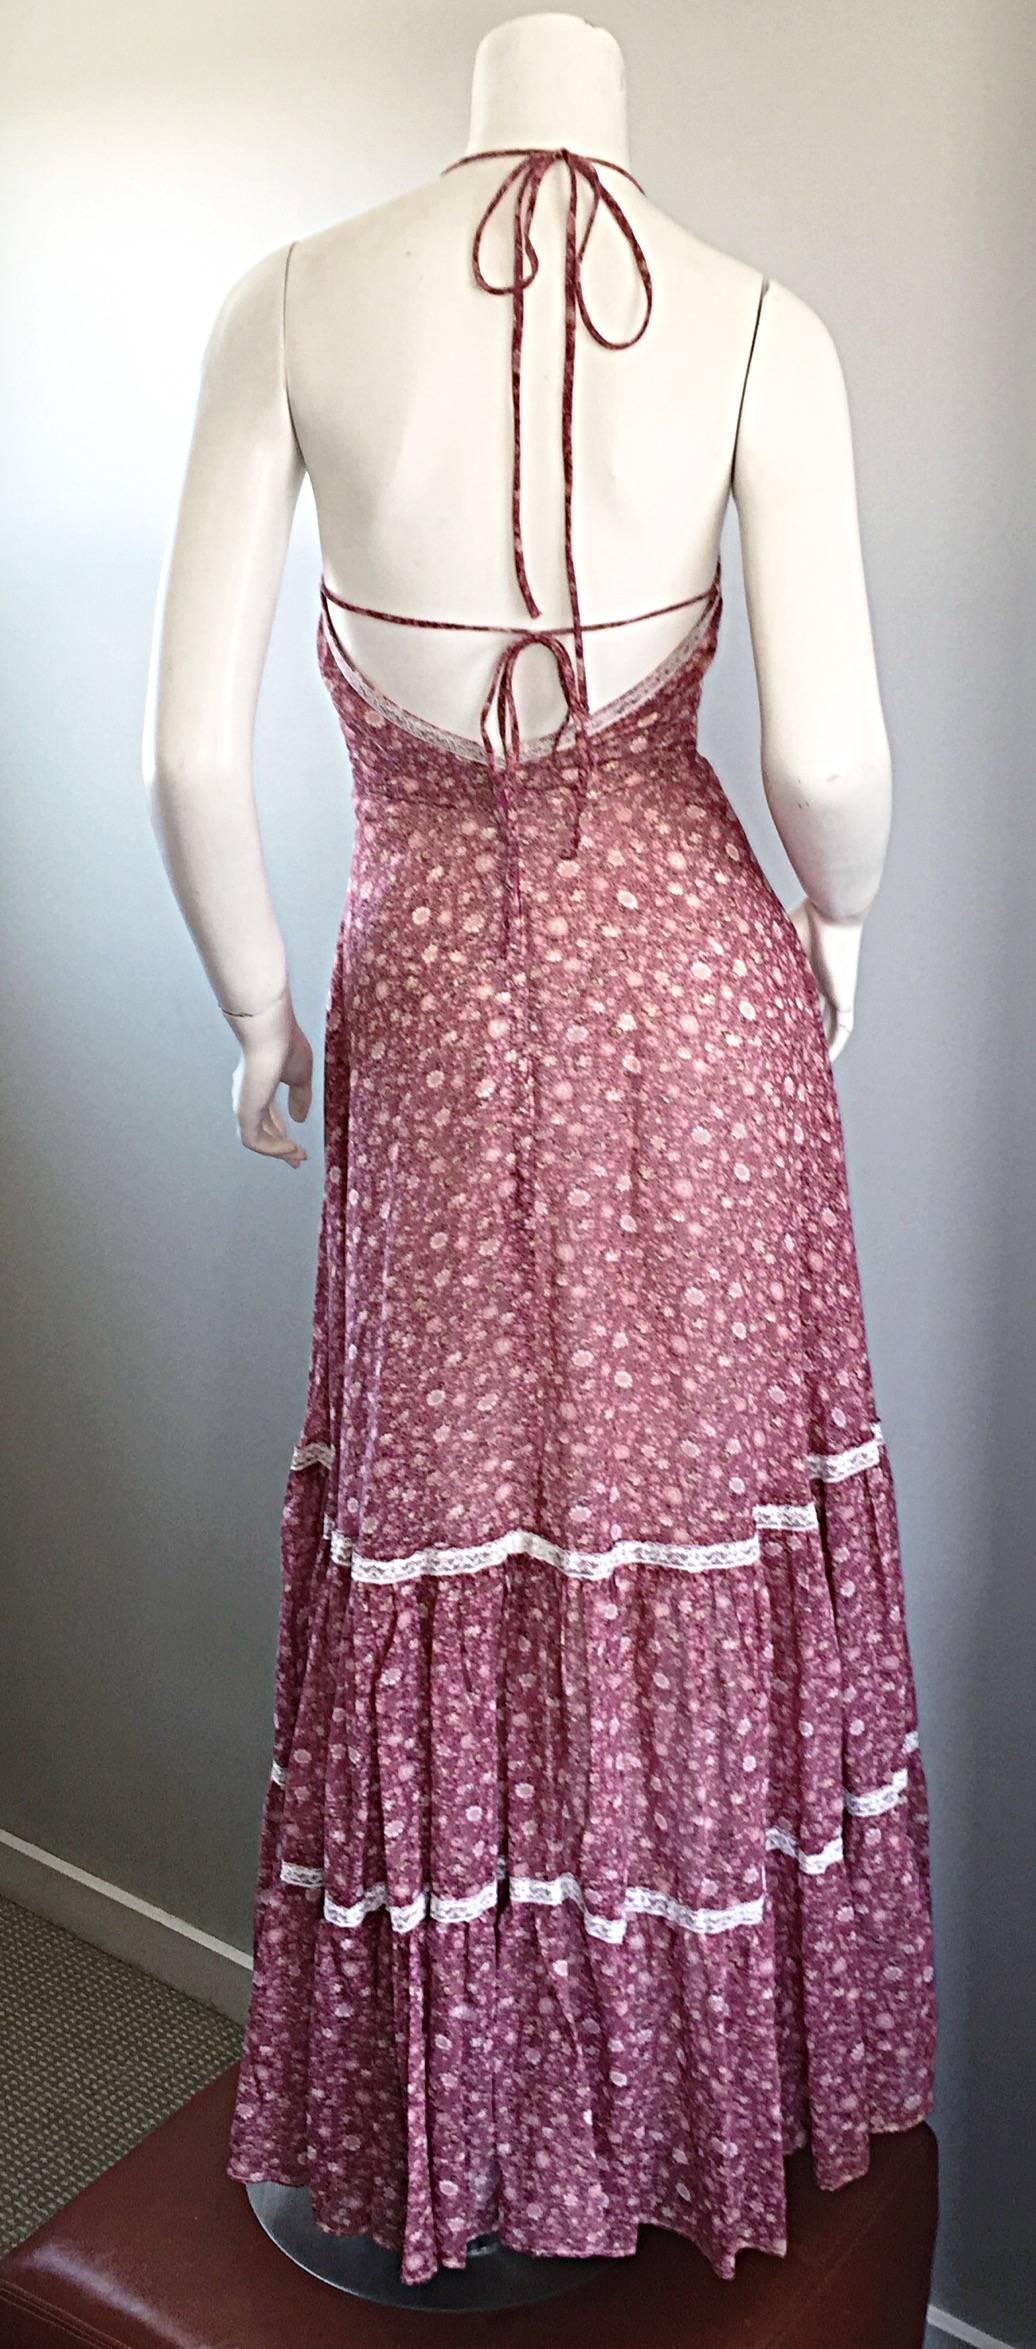 Vintage Boho 1970s Cotton Voile Raspberry Pink and Ivory Lace Halter Maxi Dress 3